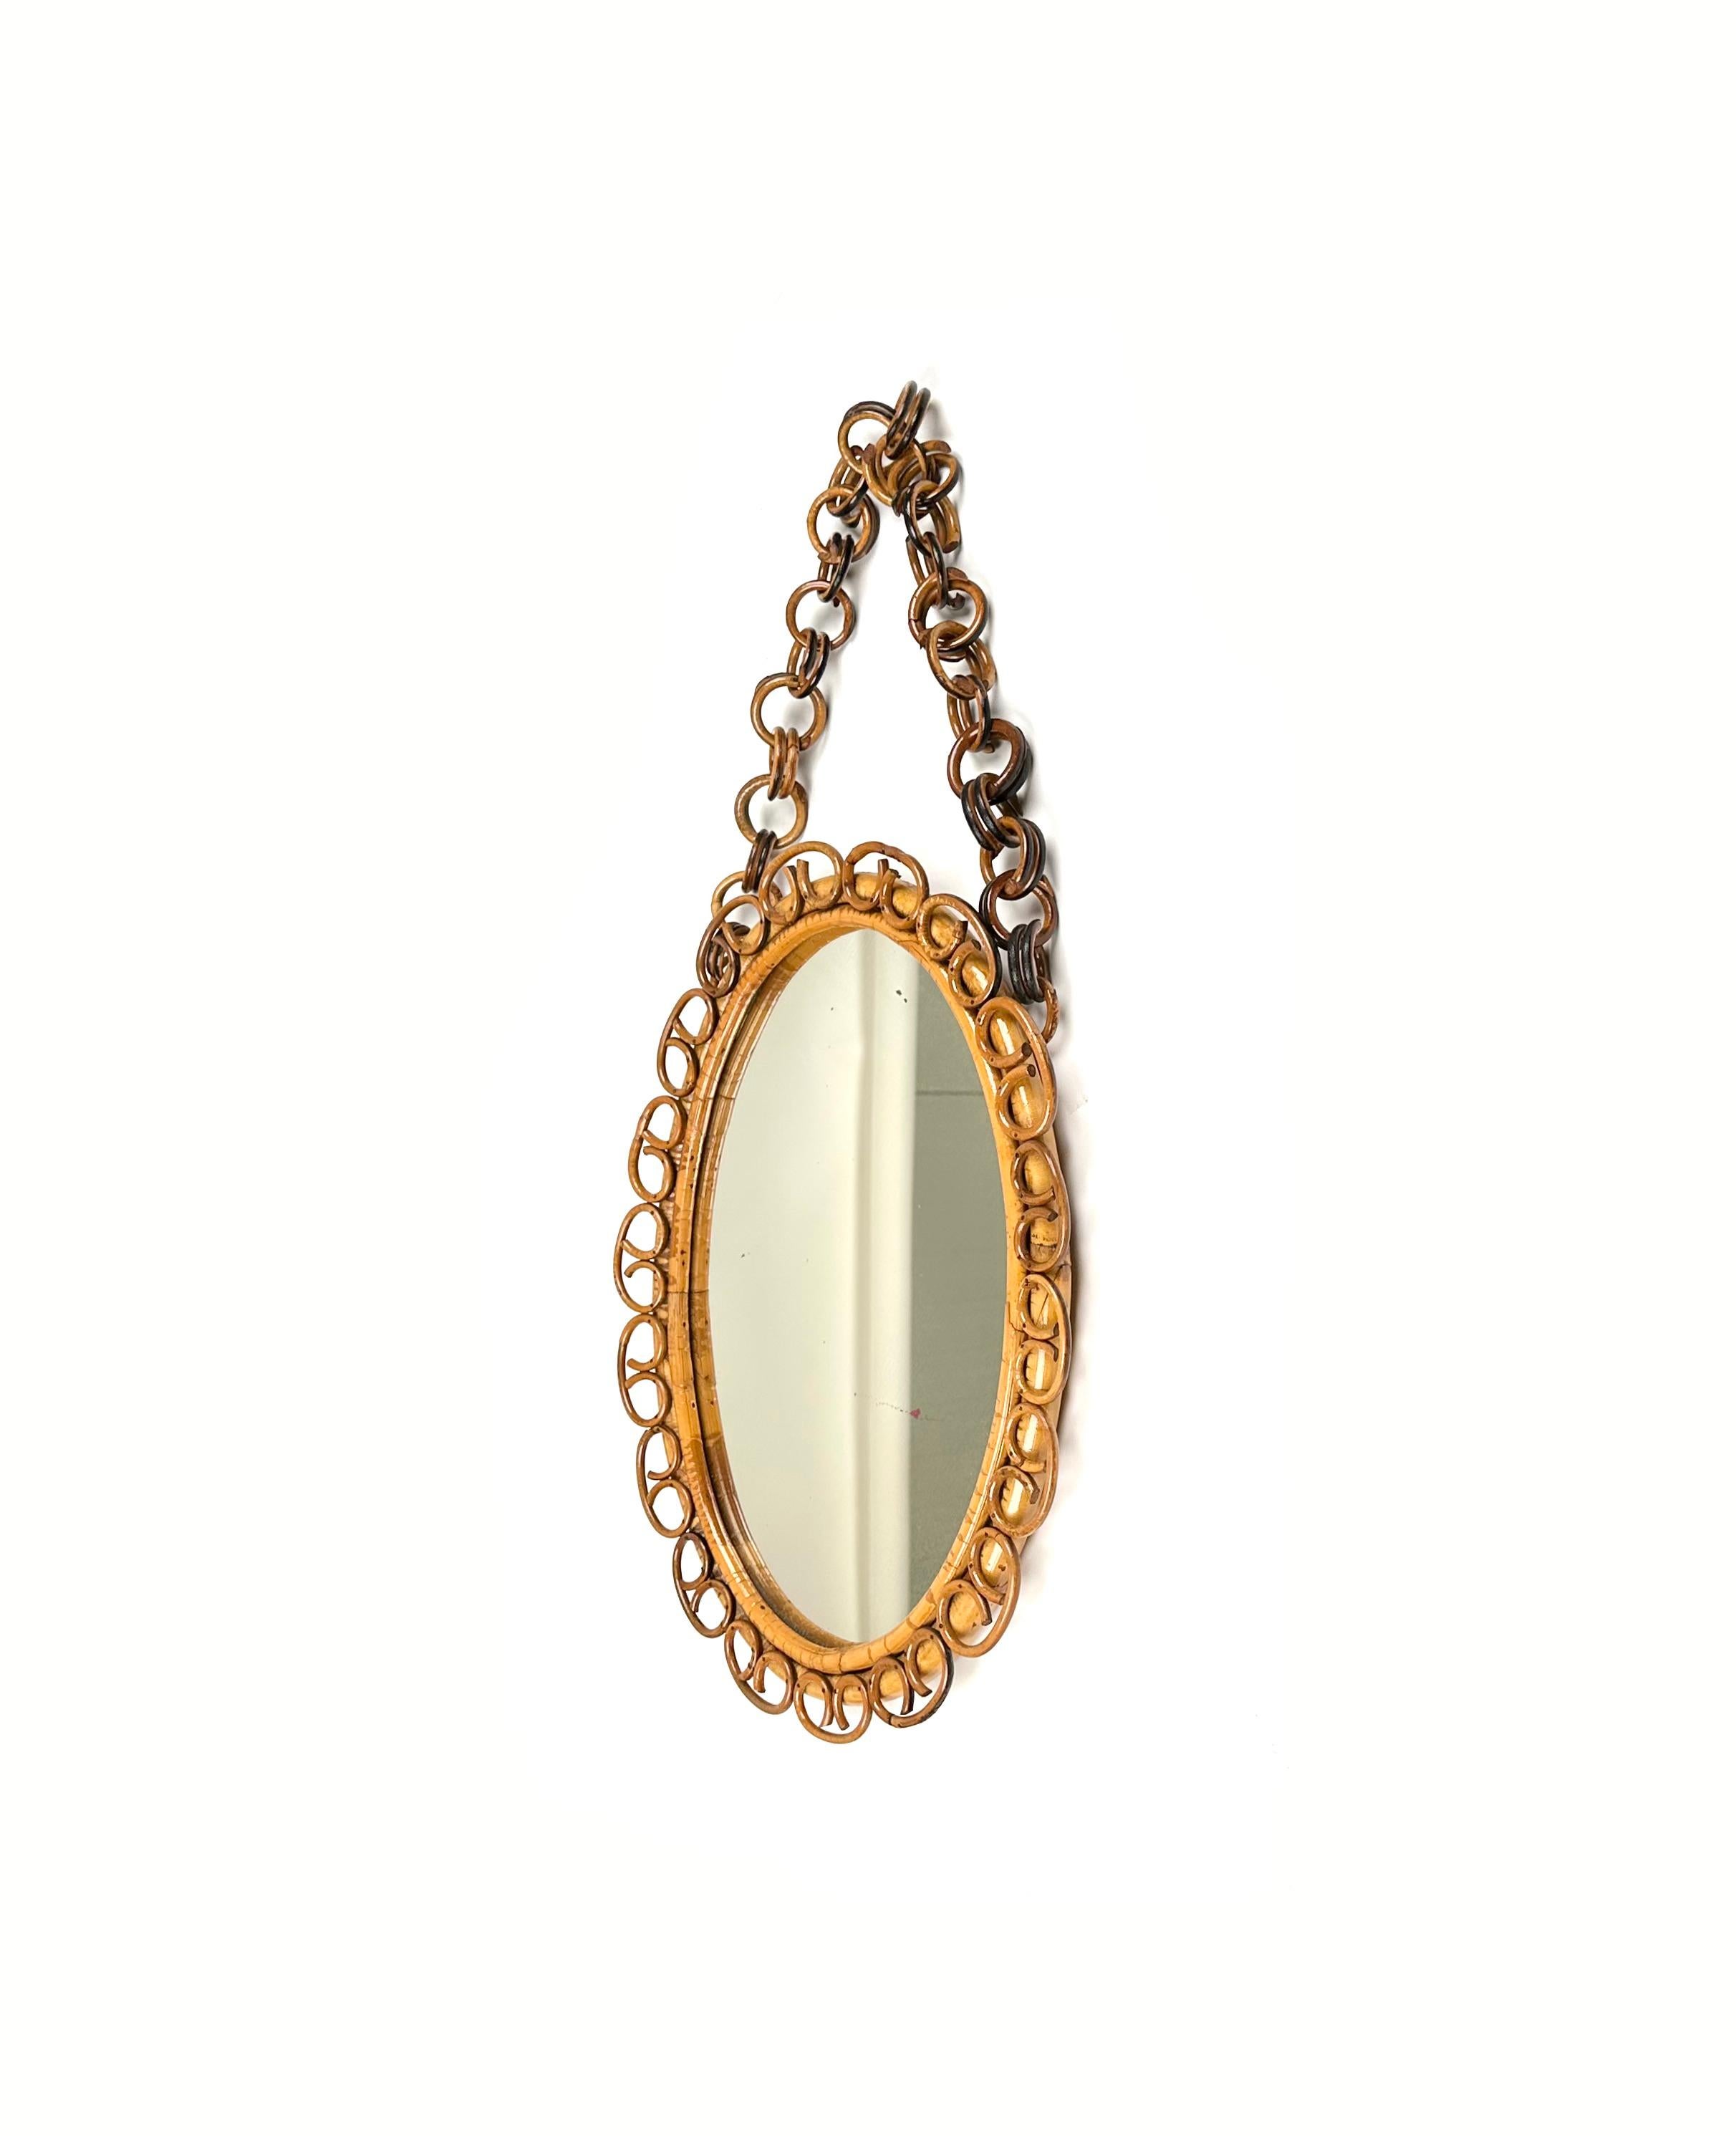 Mid-20th Century Midcentury Bamboo and Rattan Oval Wall Mirror with Chain, Italy, 1960s For Sale